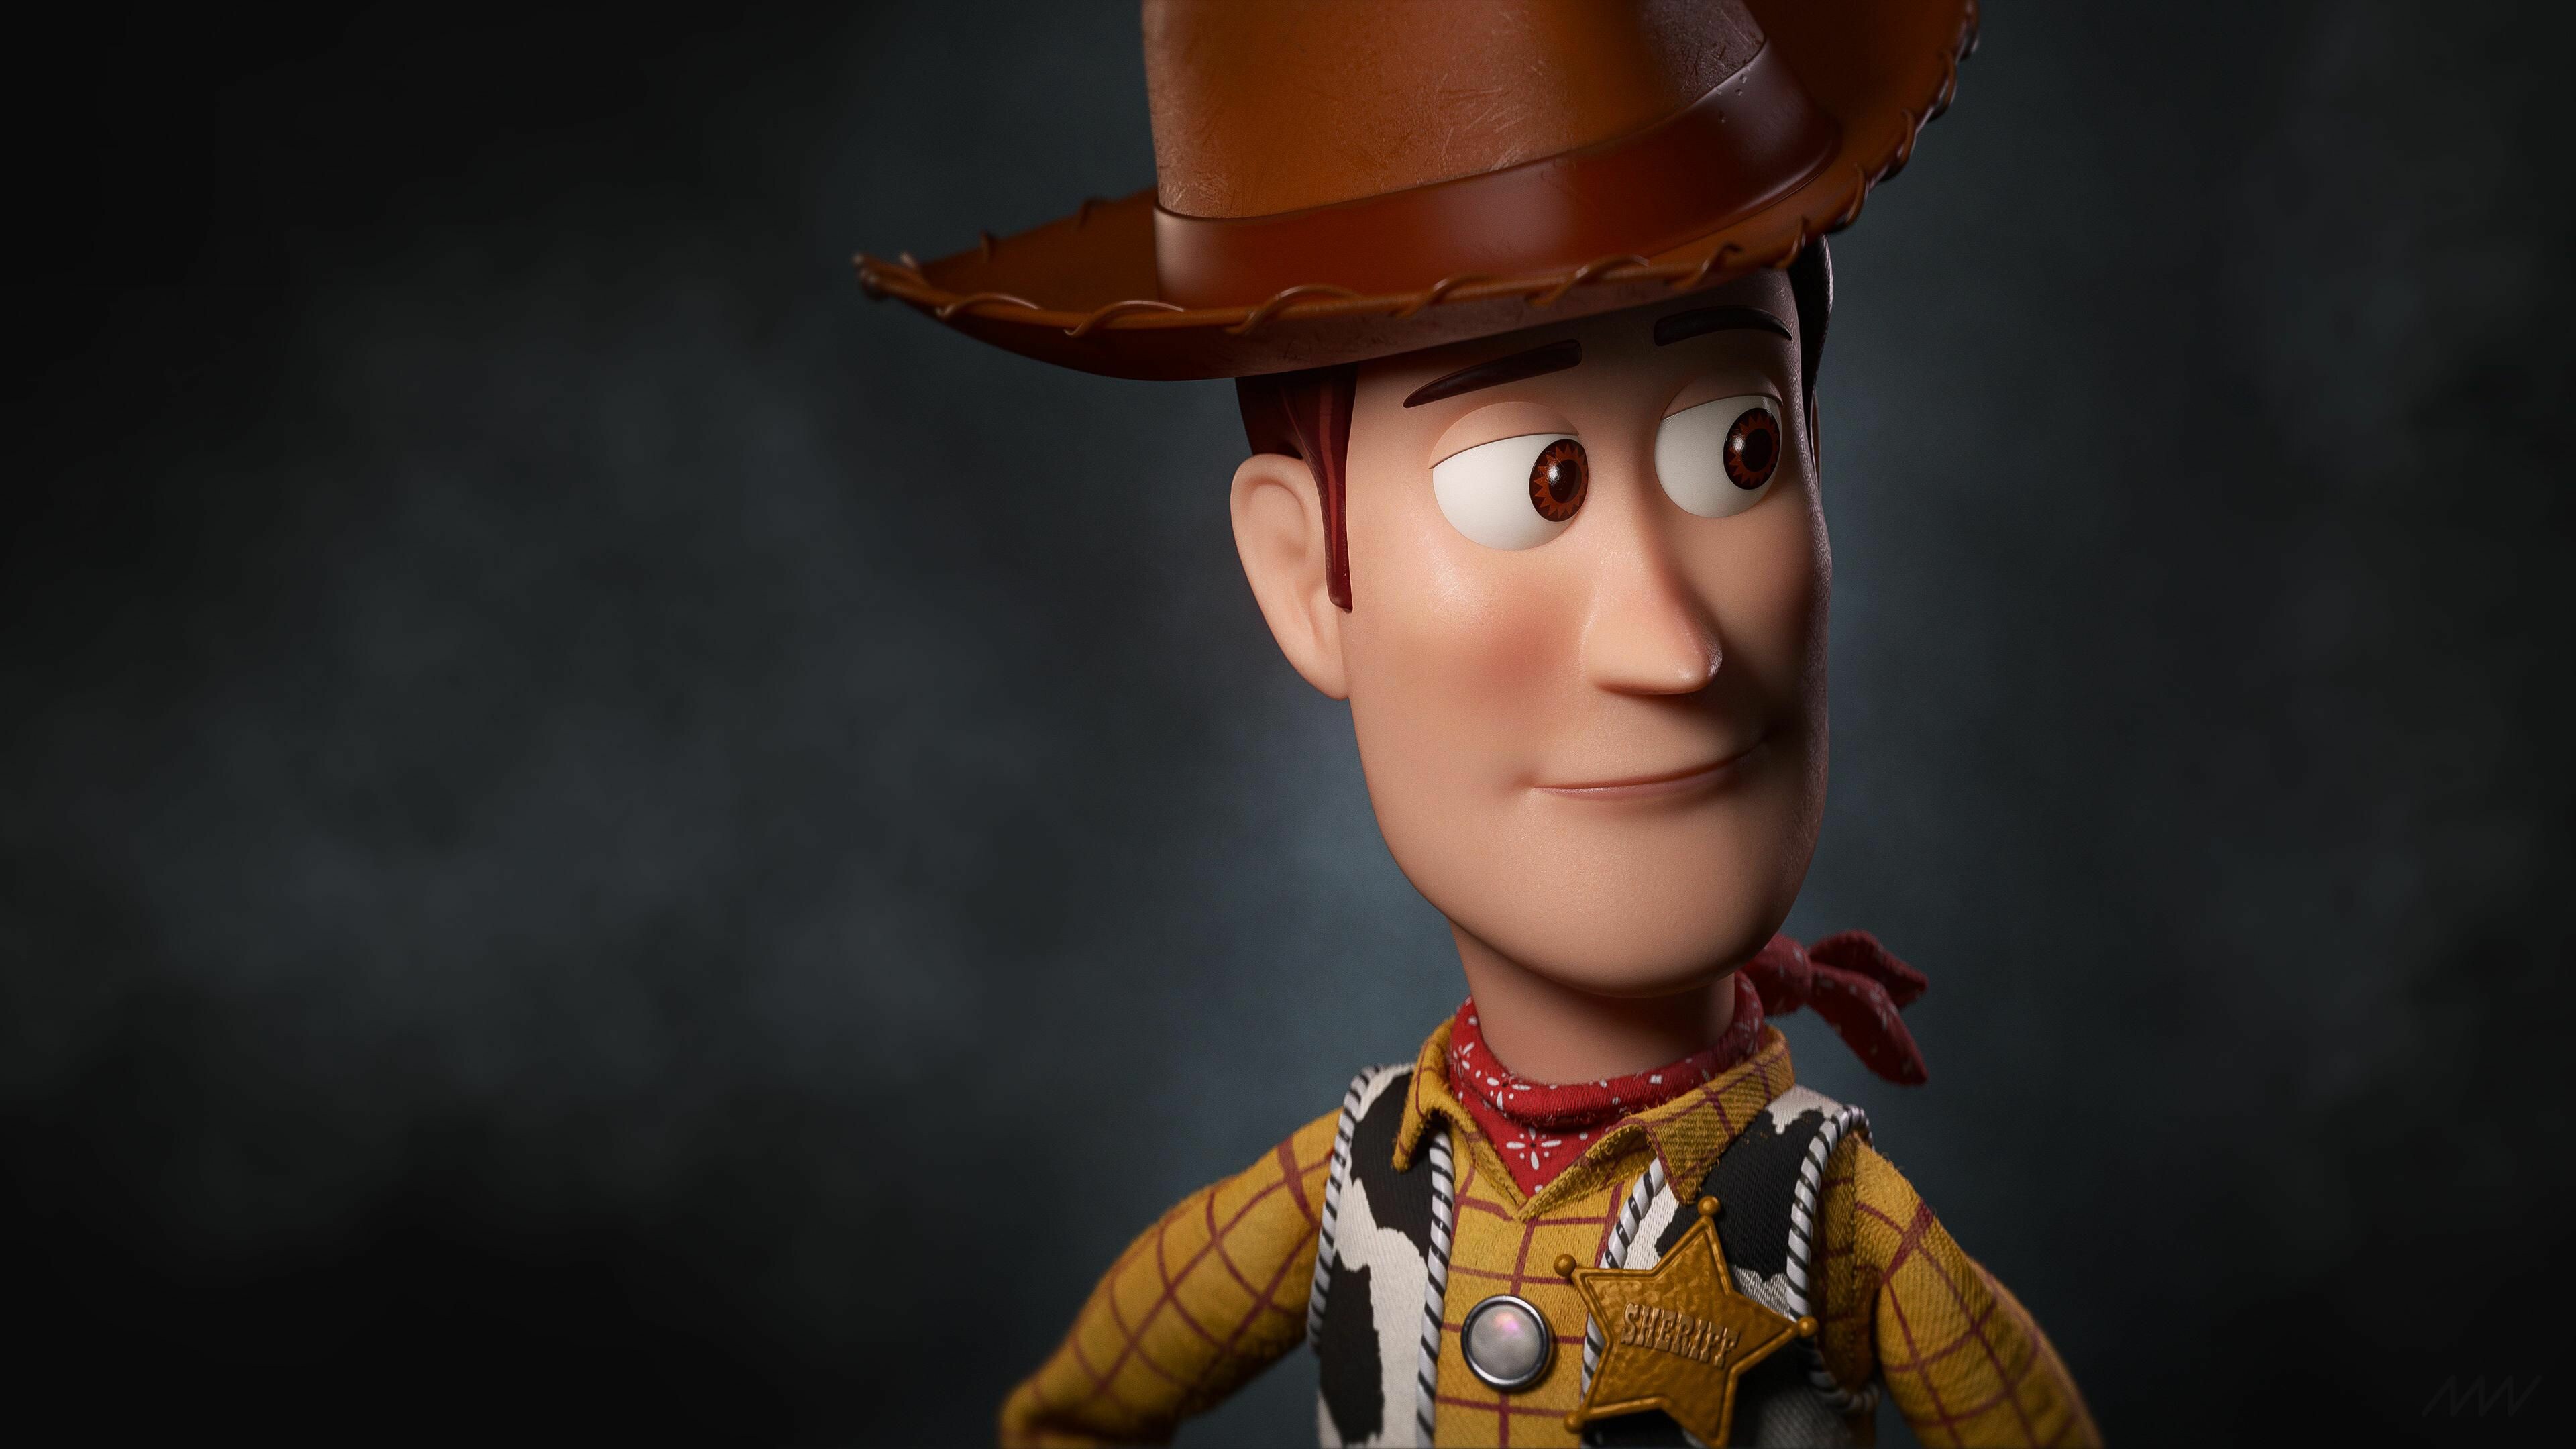 Toy Story: Woody, a 1950s old traditional pullstring cowboy doll. 3840x2160 4K Wallpaper.